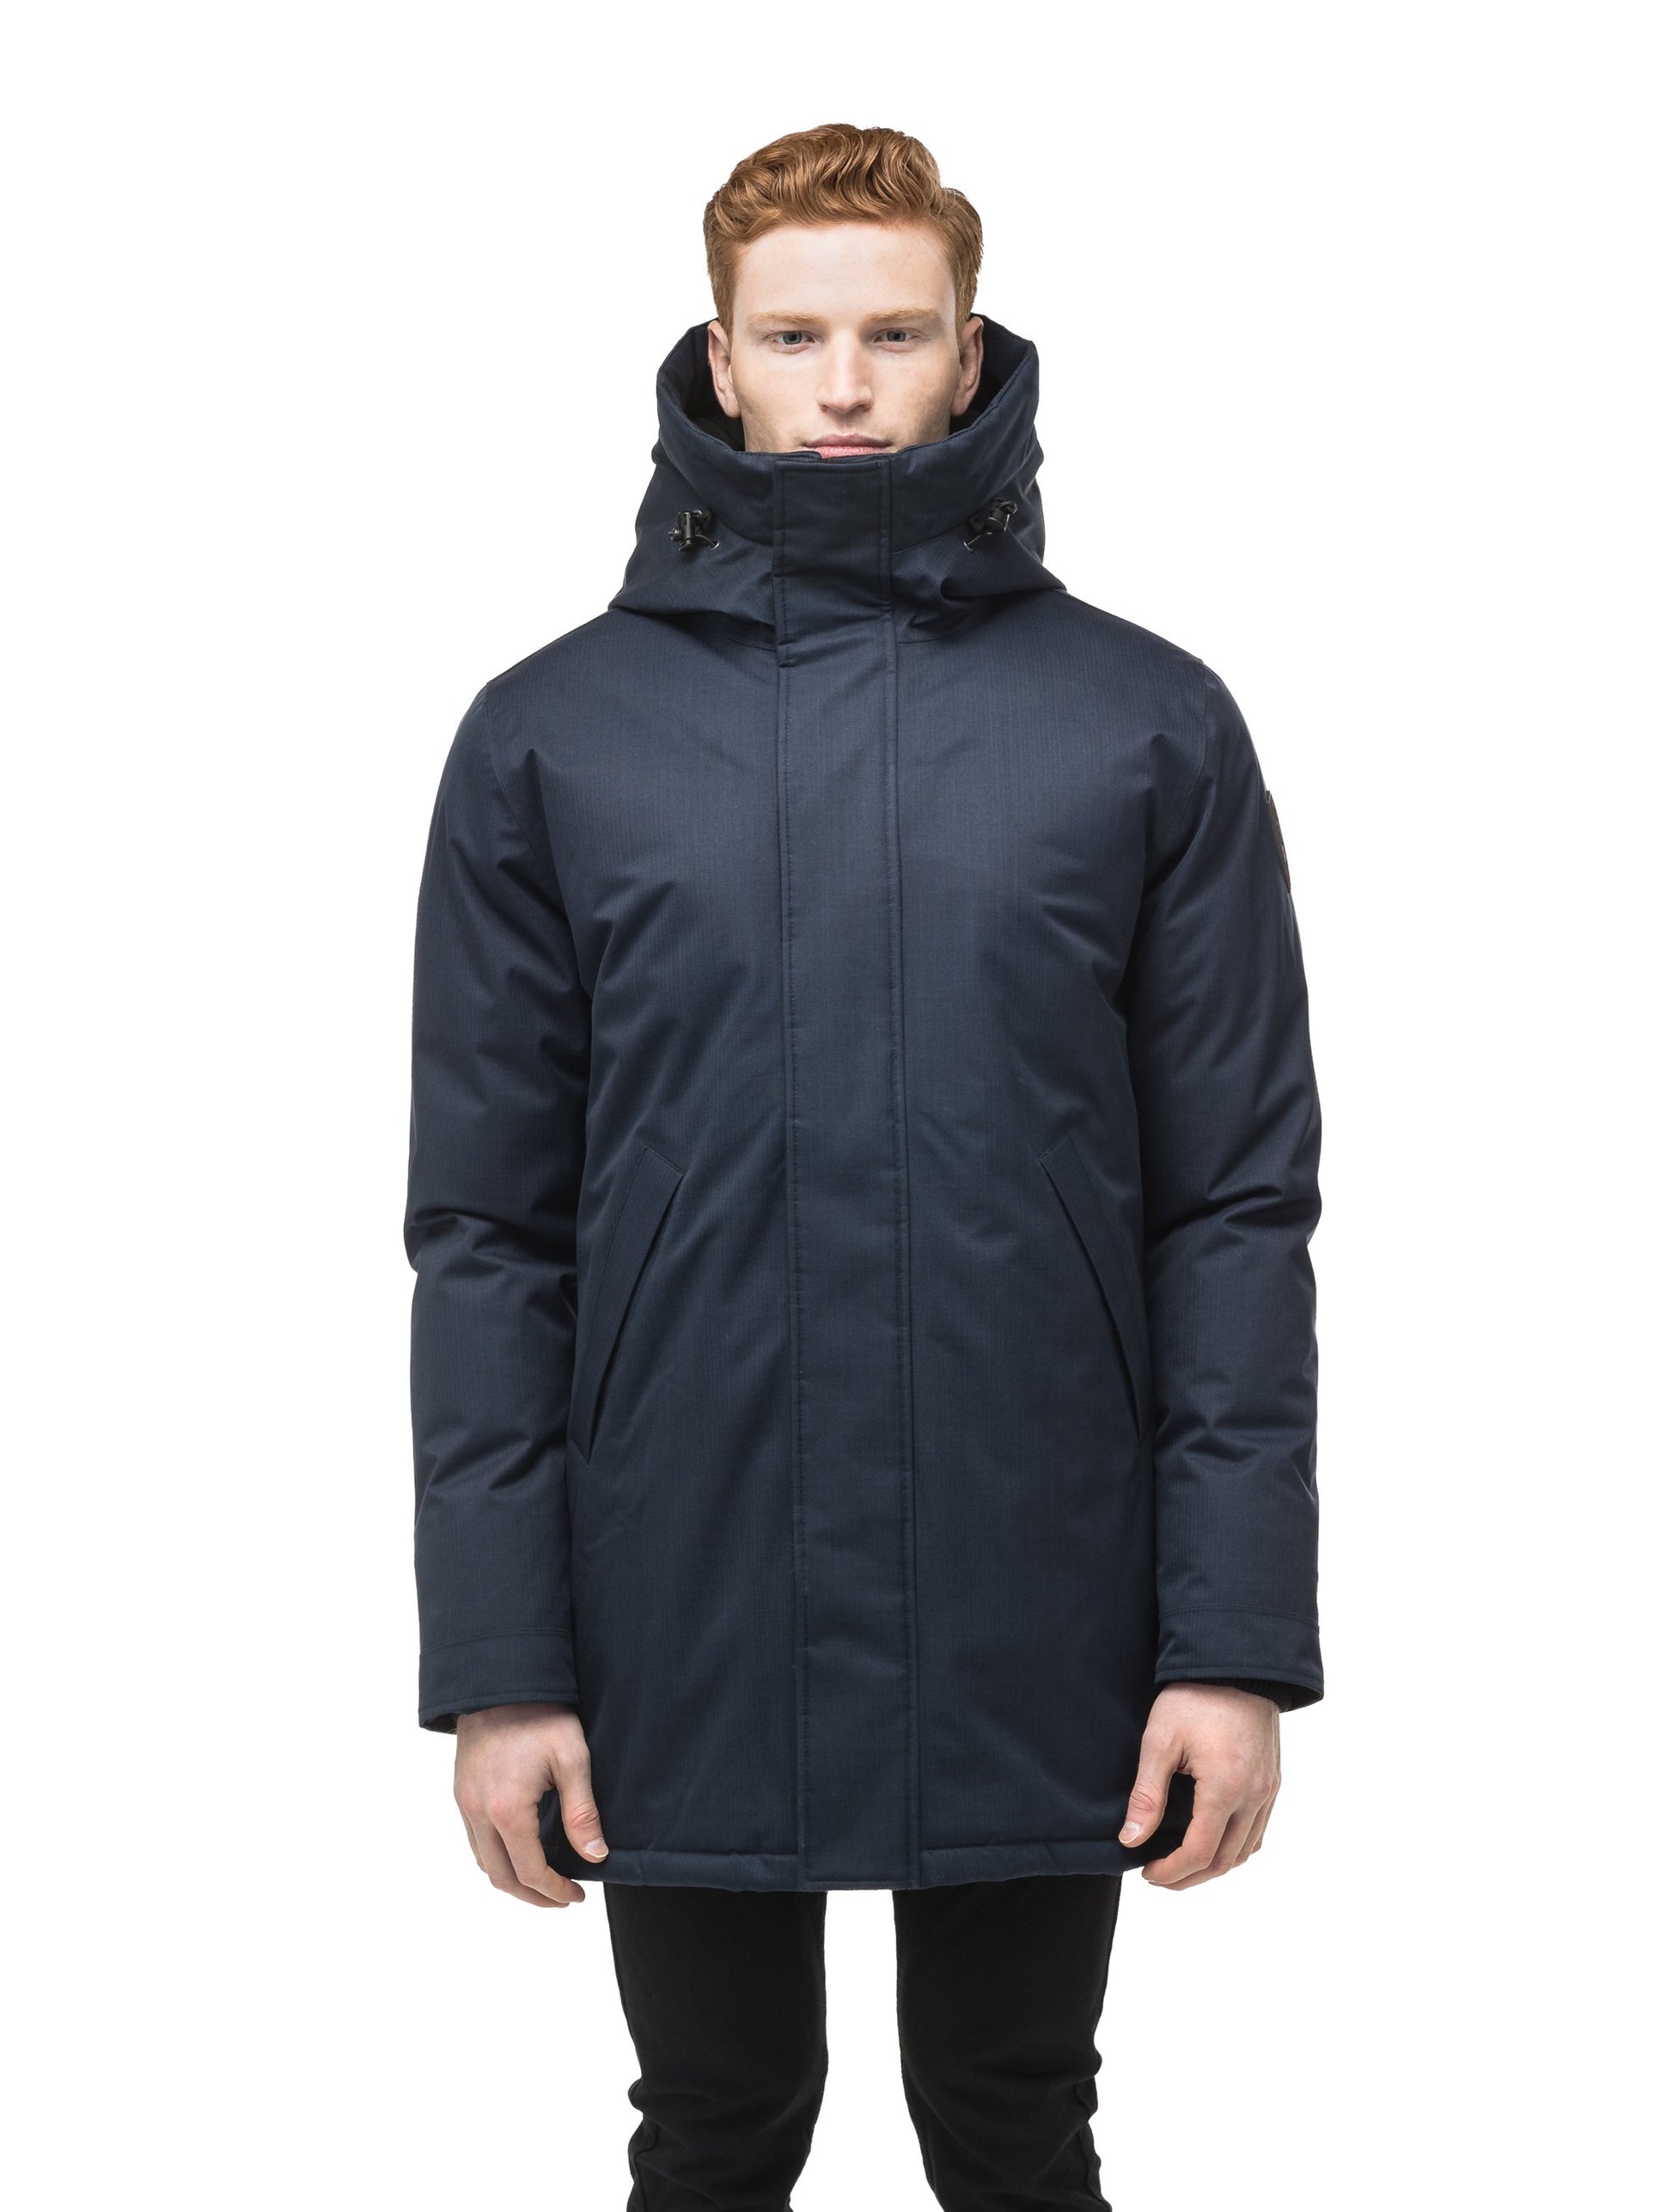 Pierre Men's Jacket in thigh length, Canadian white duck down insulation, non-removable down-filled hood, angled waist pockets, centre-front zipper with wind flap, and elastic ribbed cuffs, in CH Navy